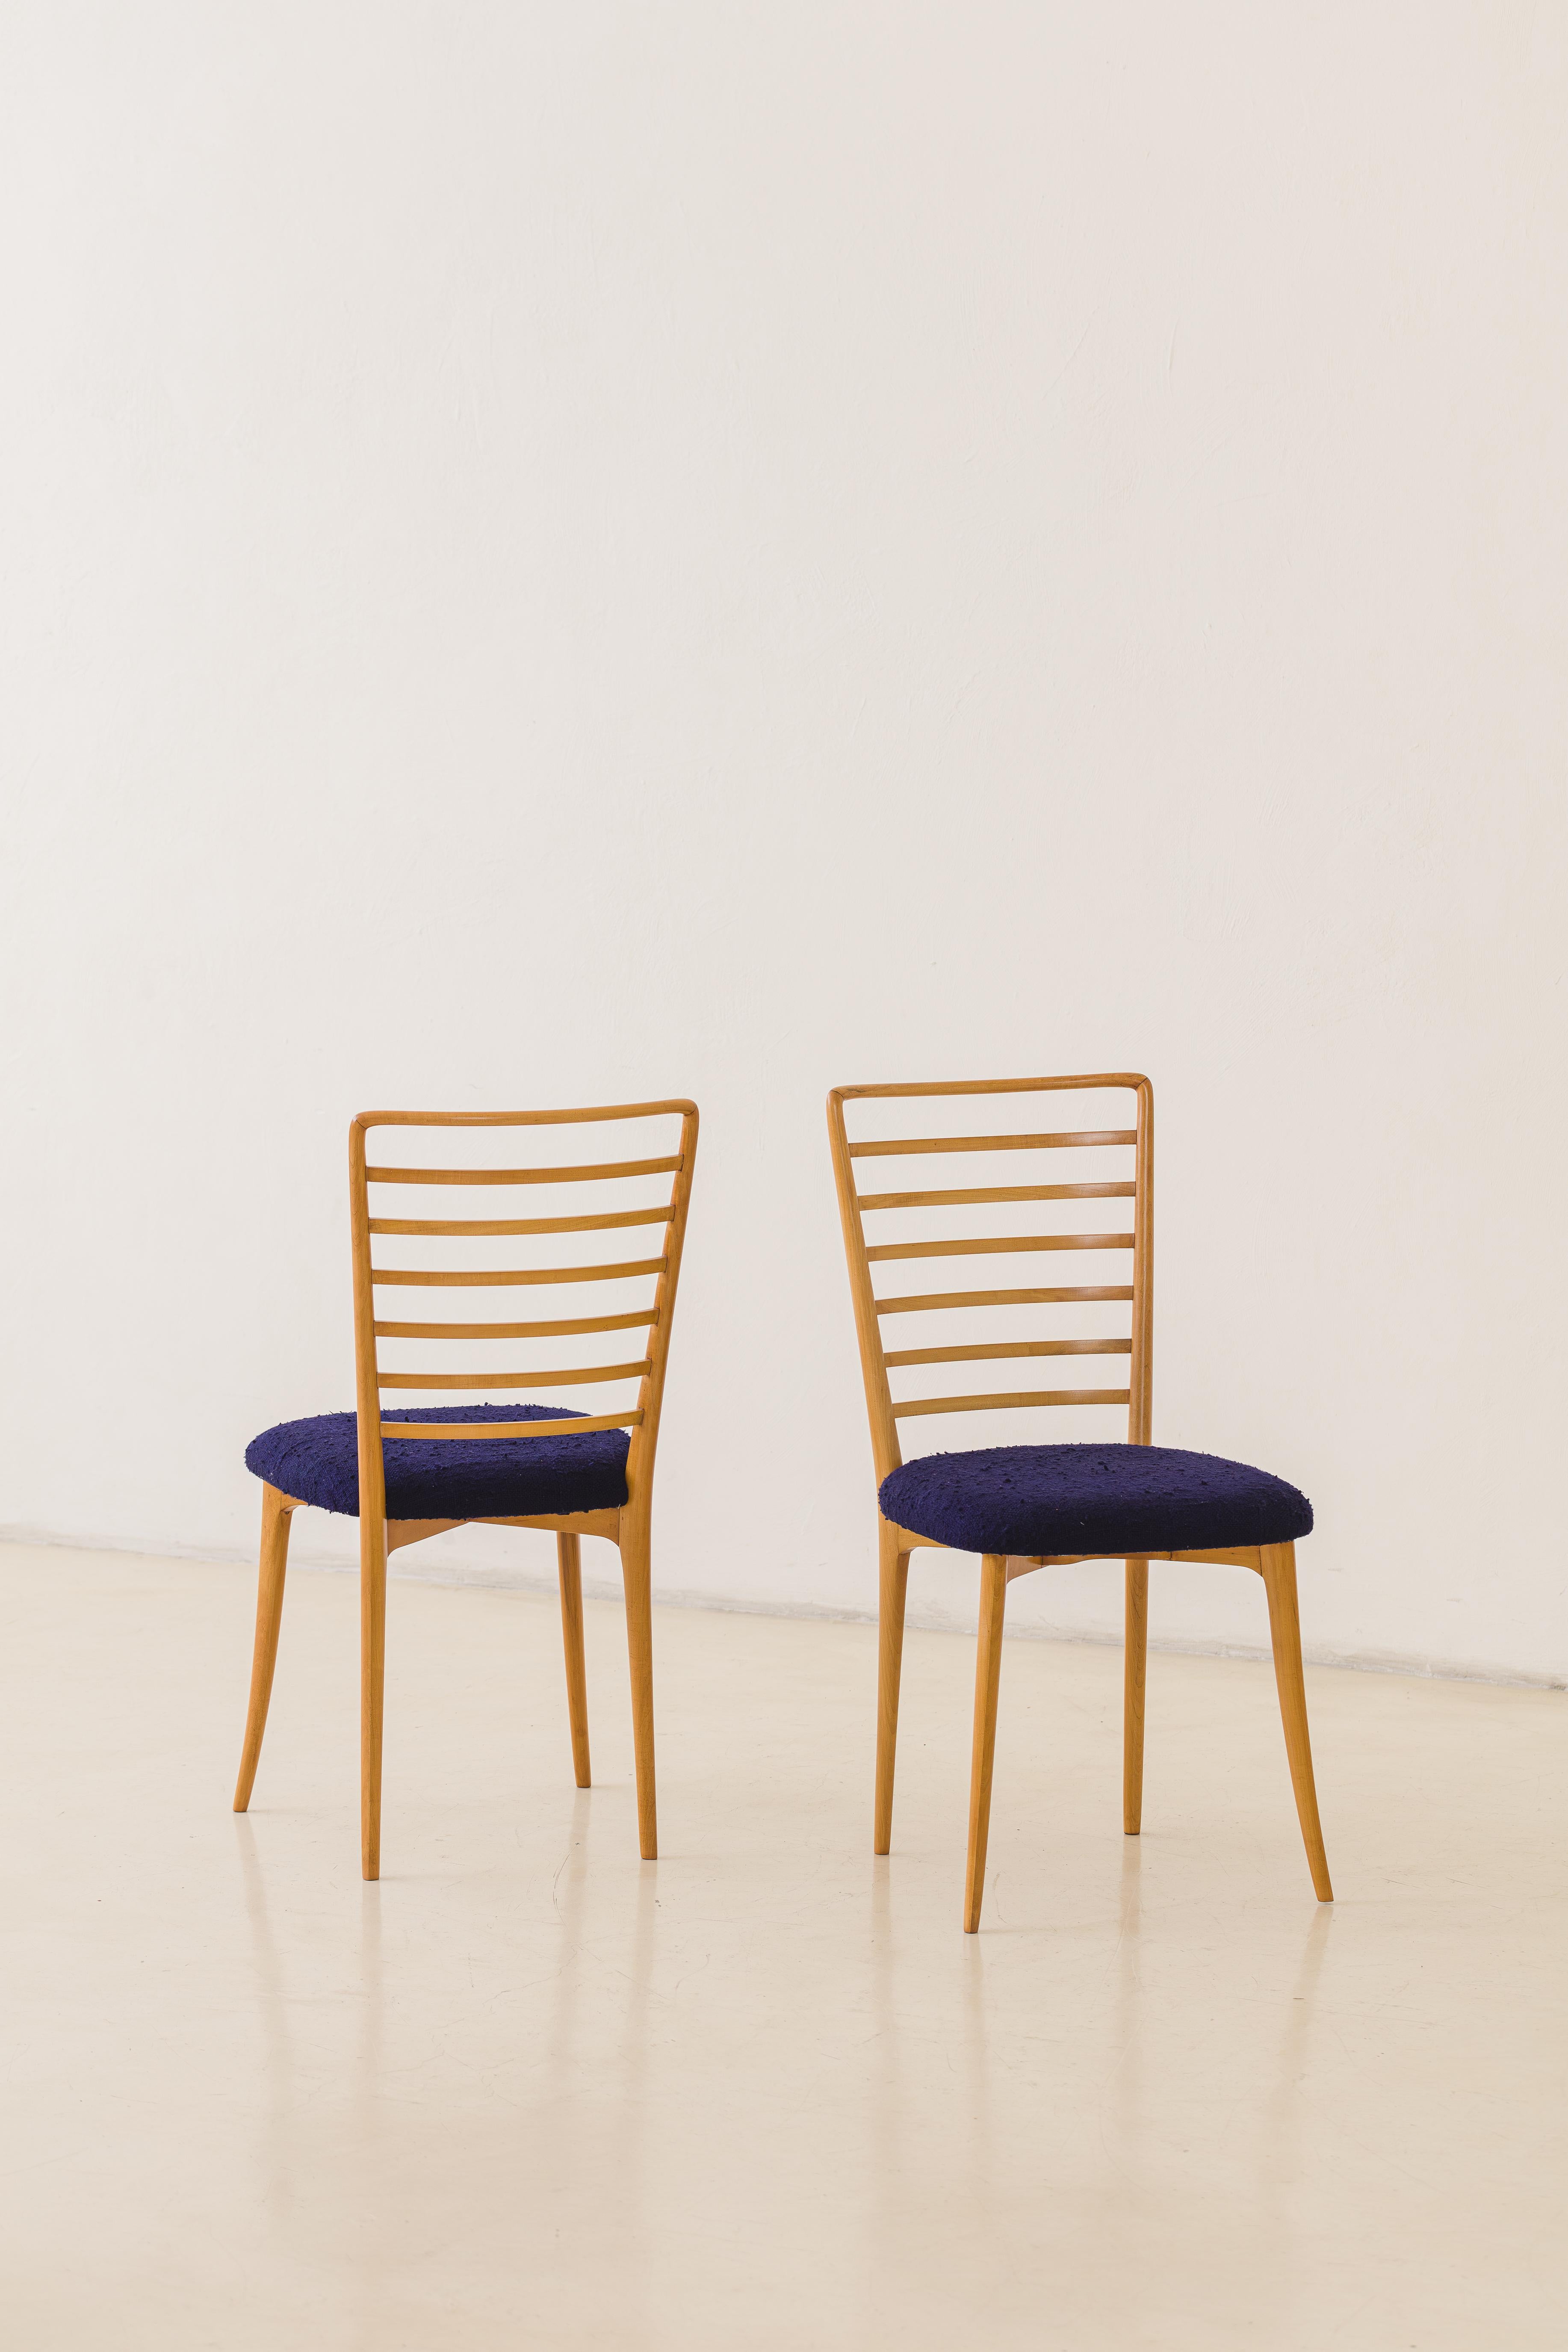 Brazilian Joaquim Tenreiro Dining Chairs, Solid Wood and Fabric, MidCentury, Brazil, 1950s For Sale